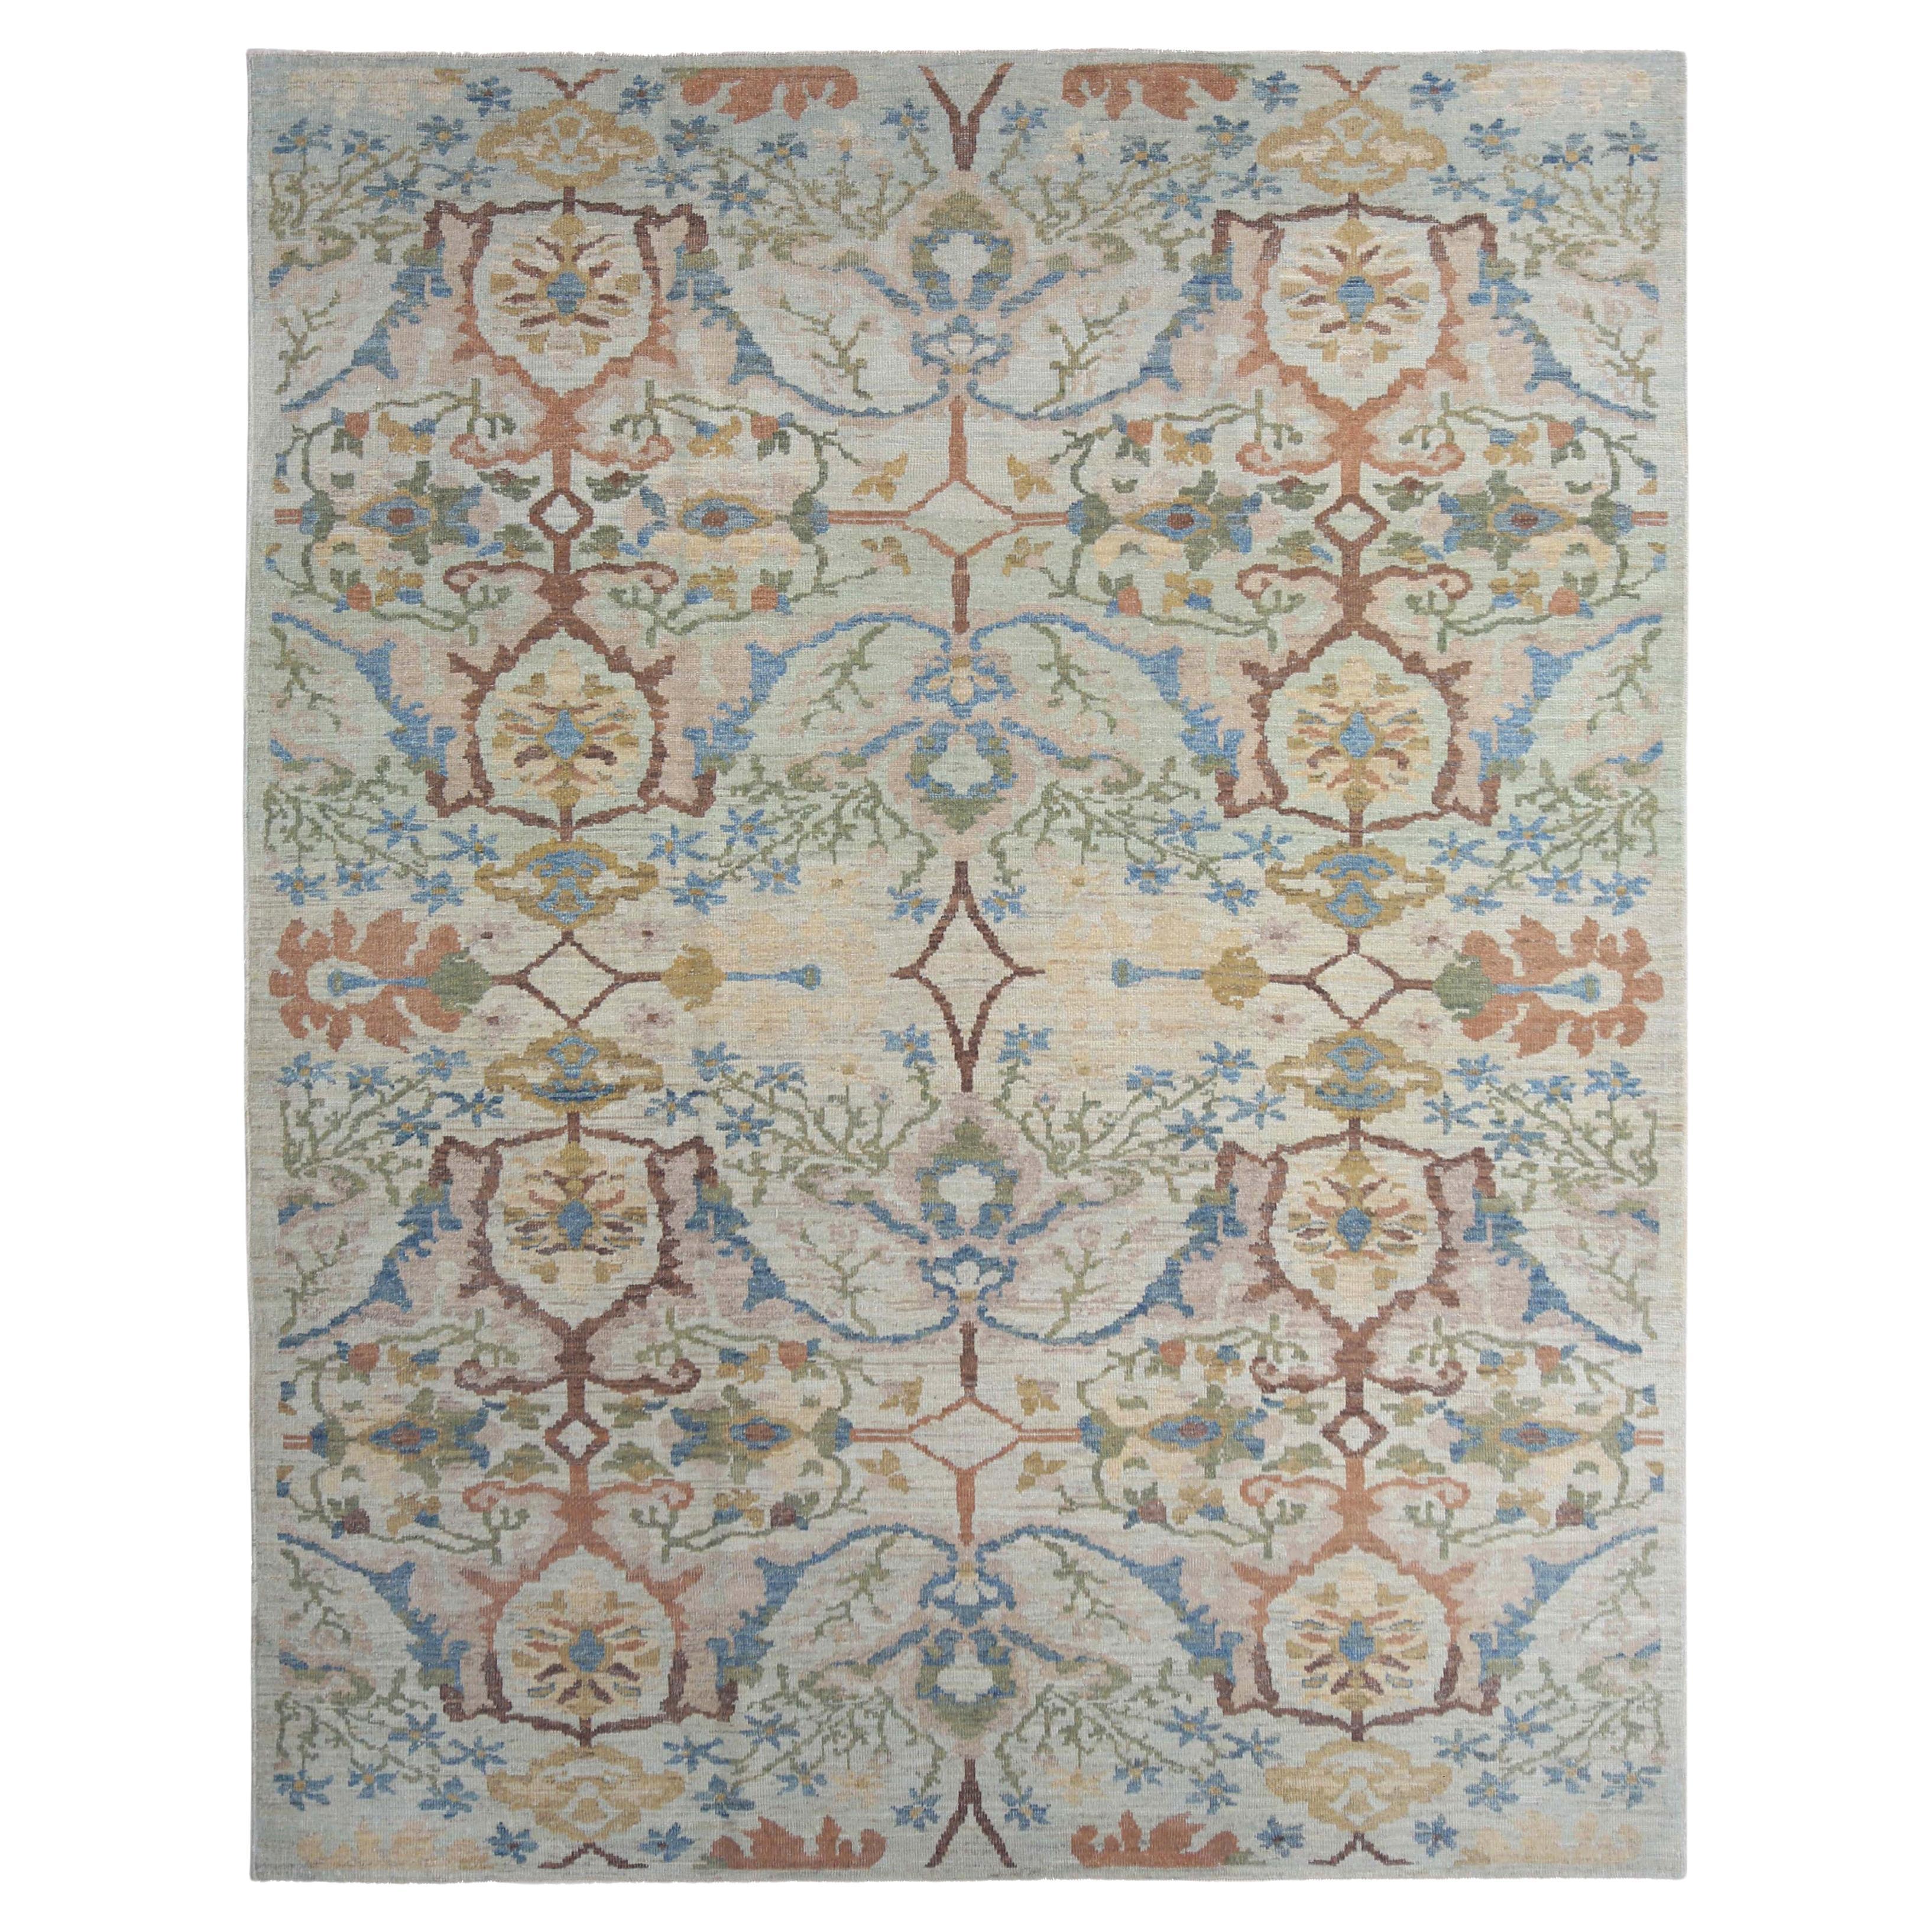 Vivid and Colorful Contemporary Sultanabad Rug For Sale